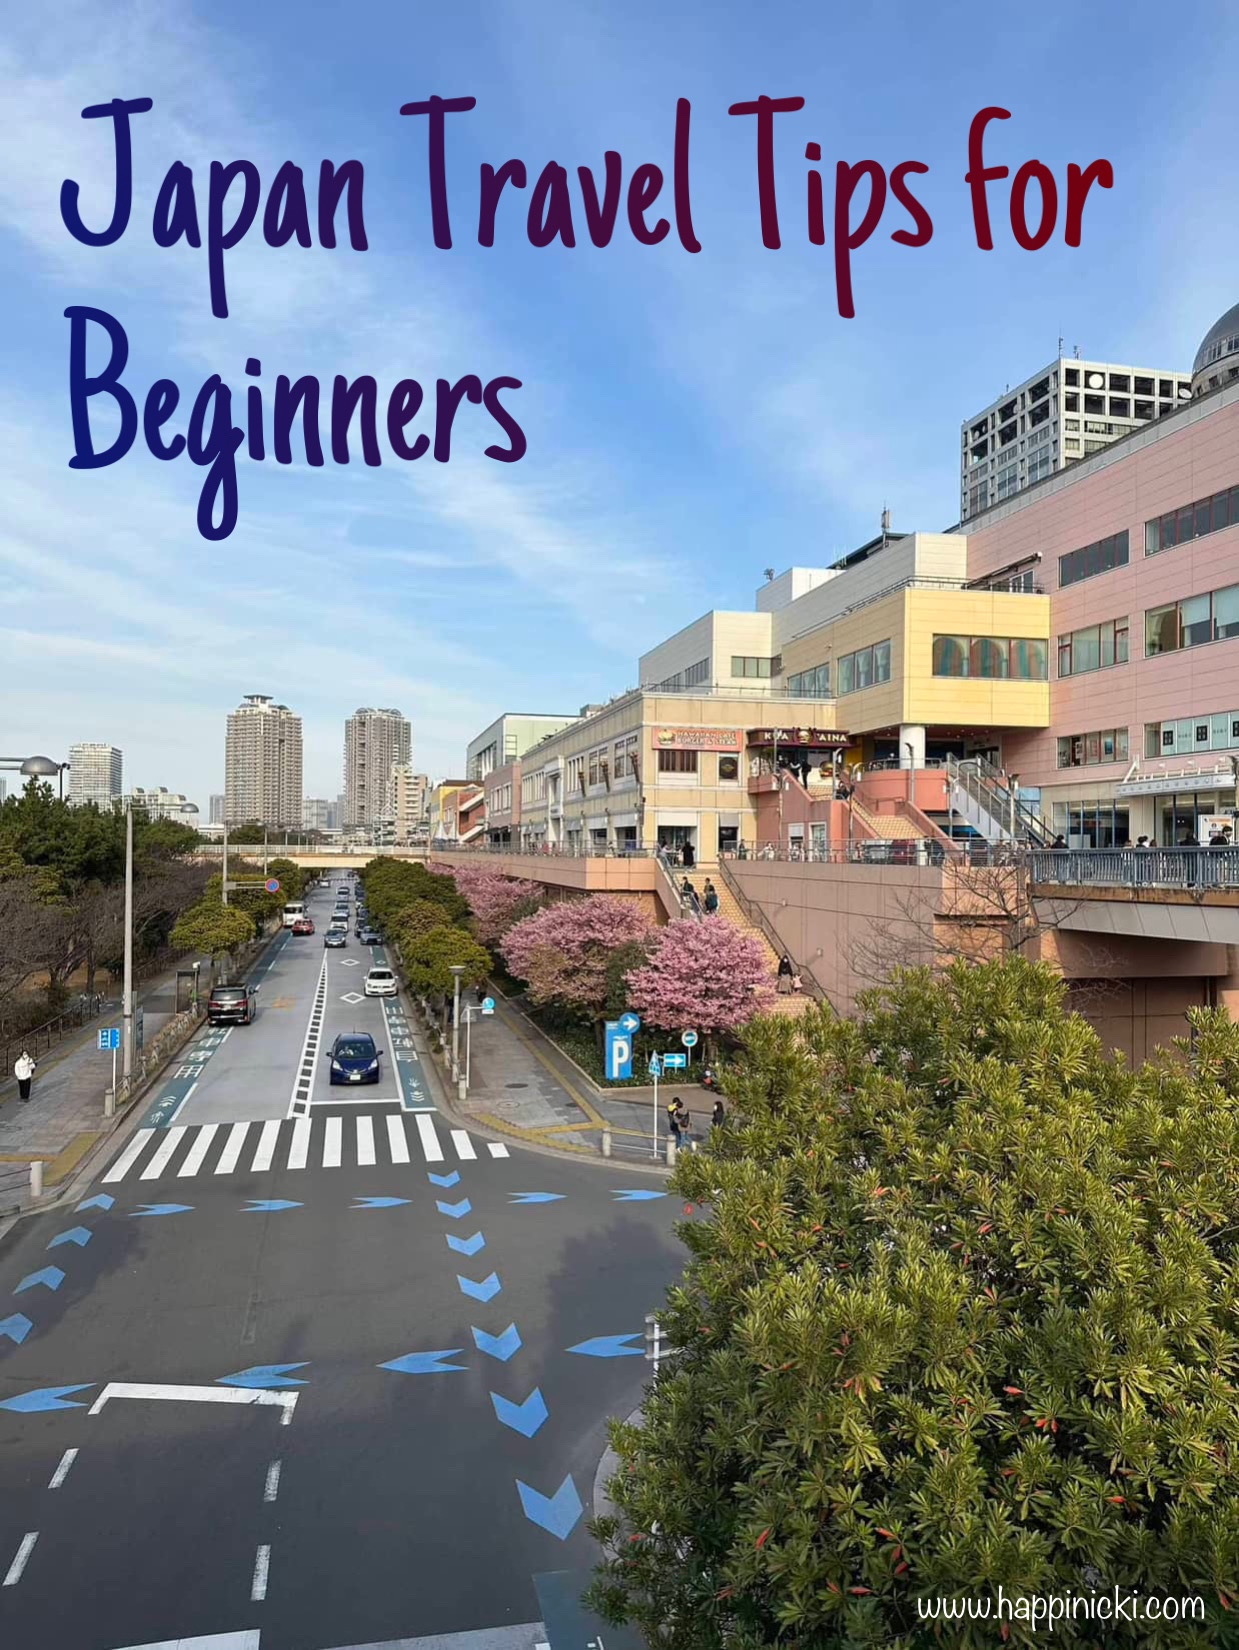 Japan Travel Tips for Beginners: How to Survive Traveling Independently